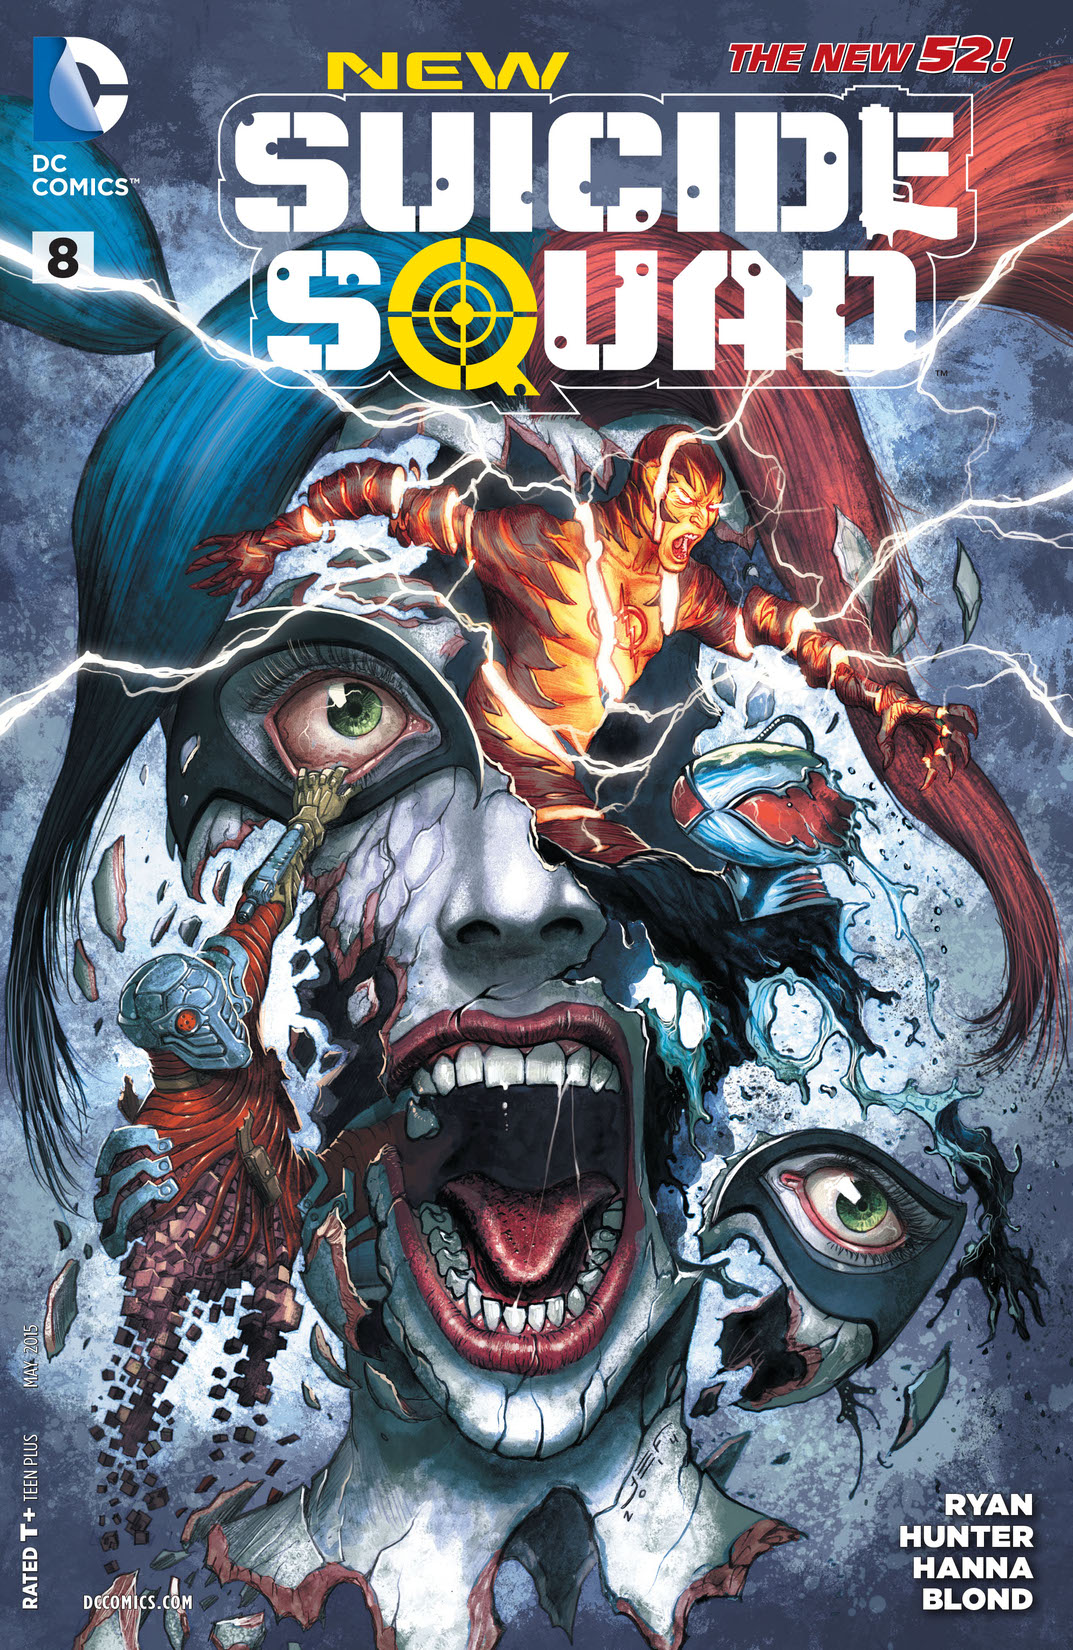 New Suicide Squad #8 preview images